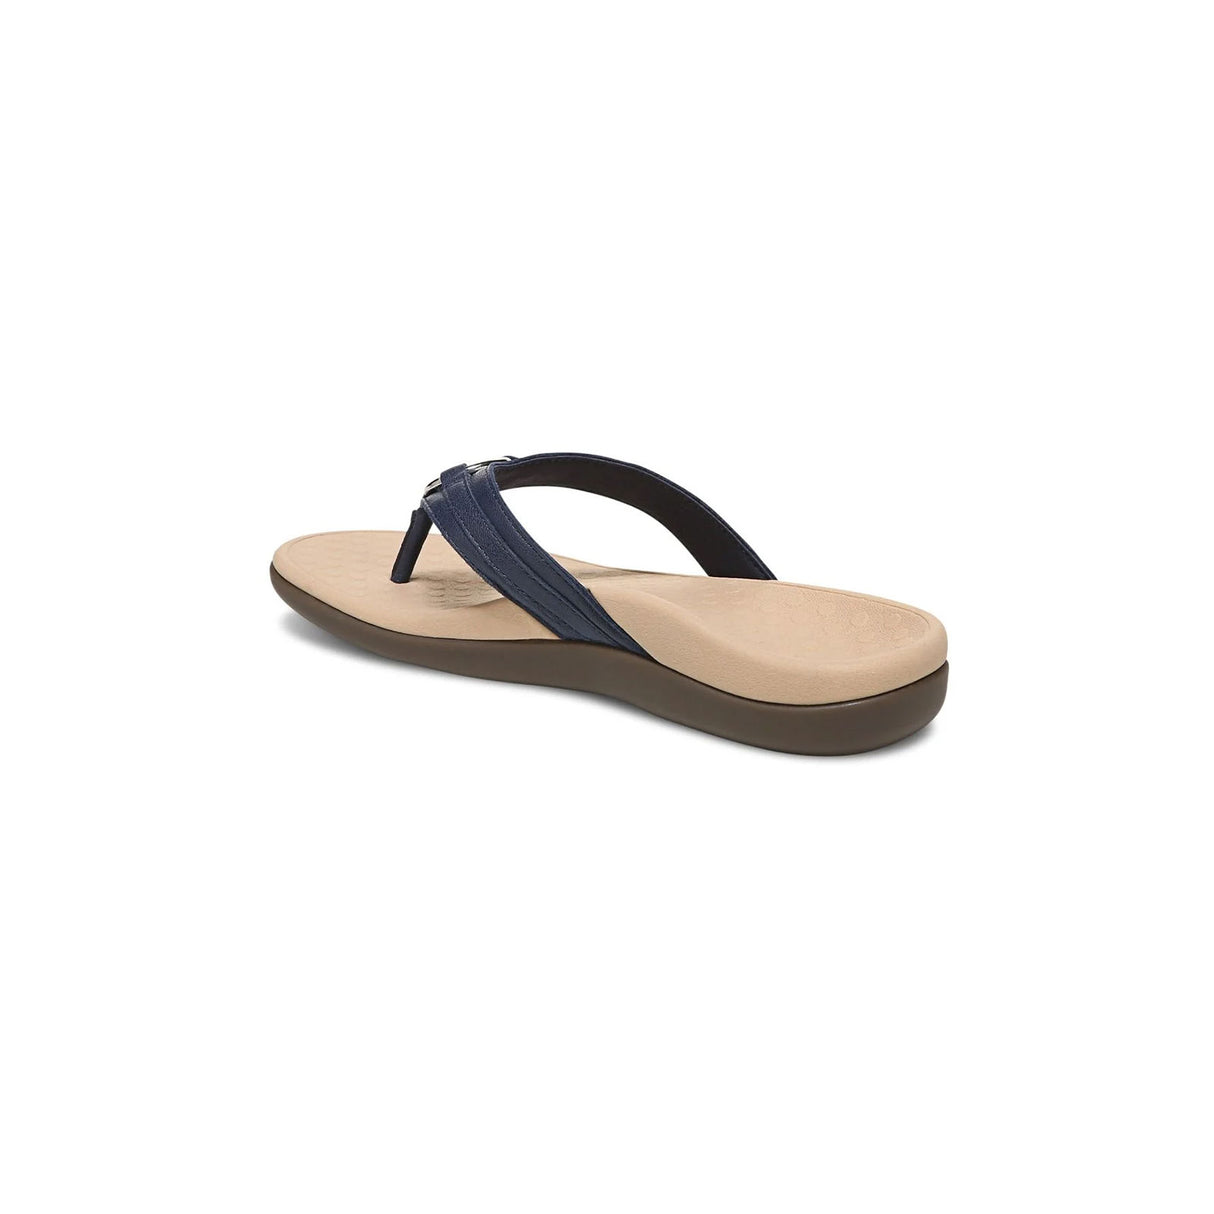 Vionic Aloe (Women) - Navy Nappa Leather Sandals - Thong - The Heel Shoe Fitters